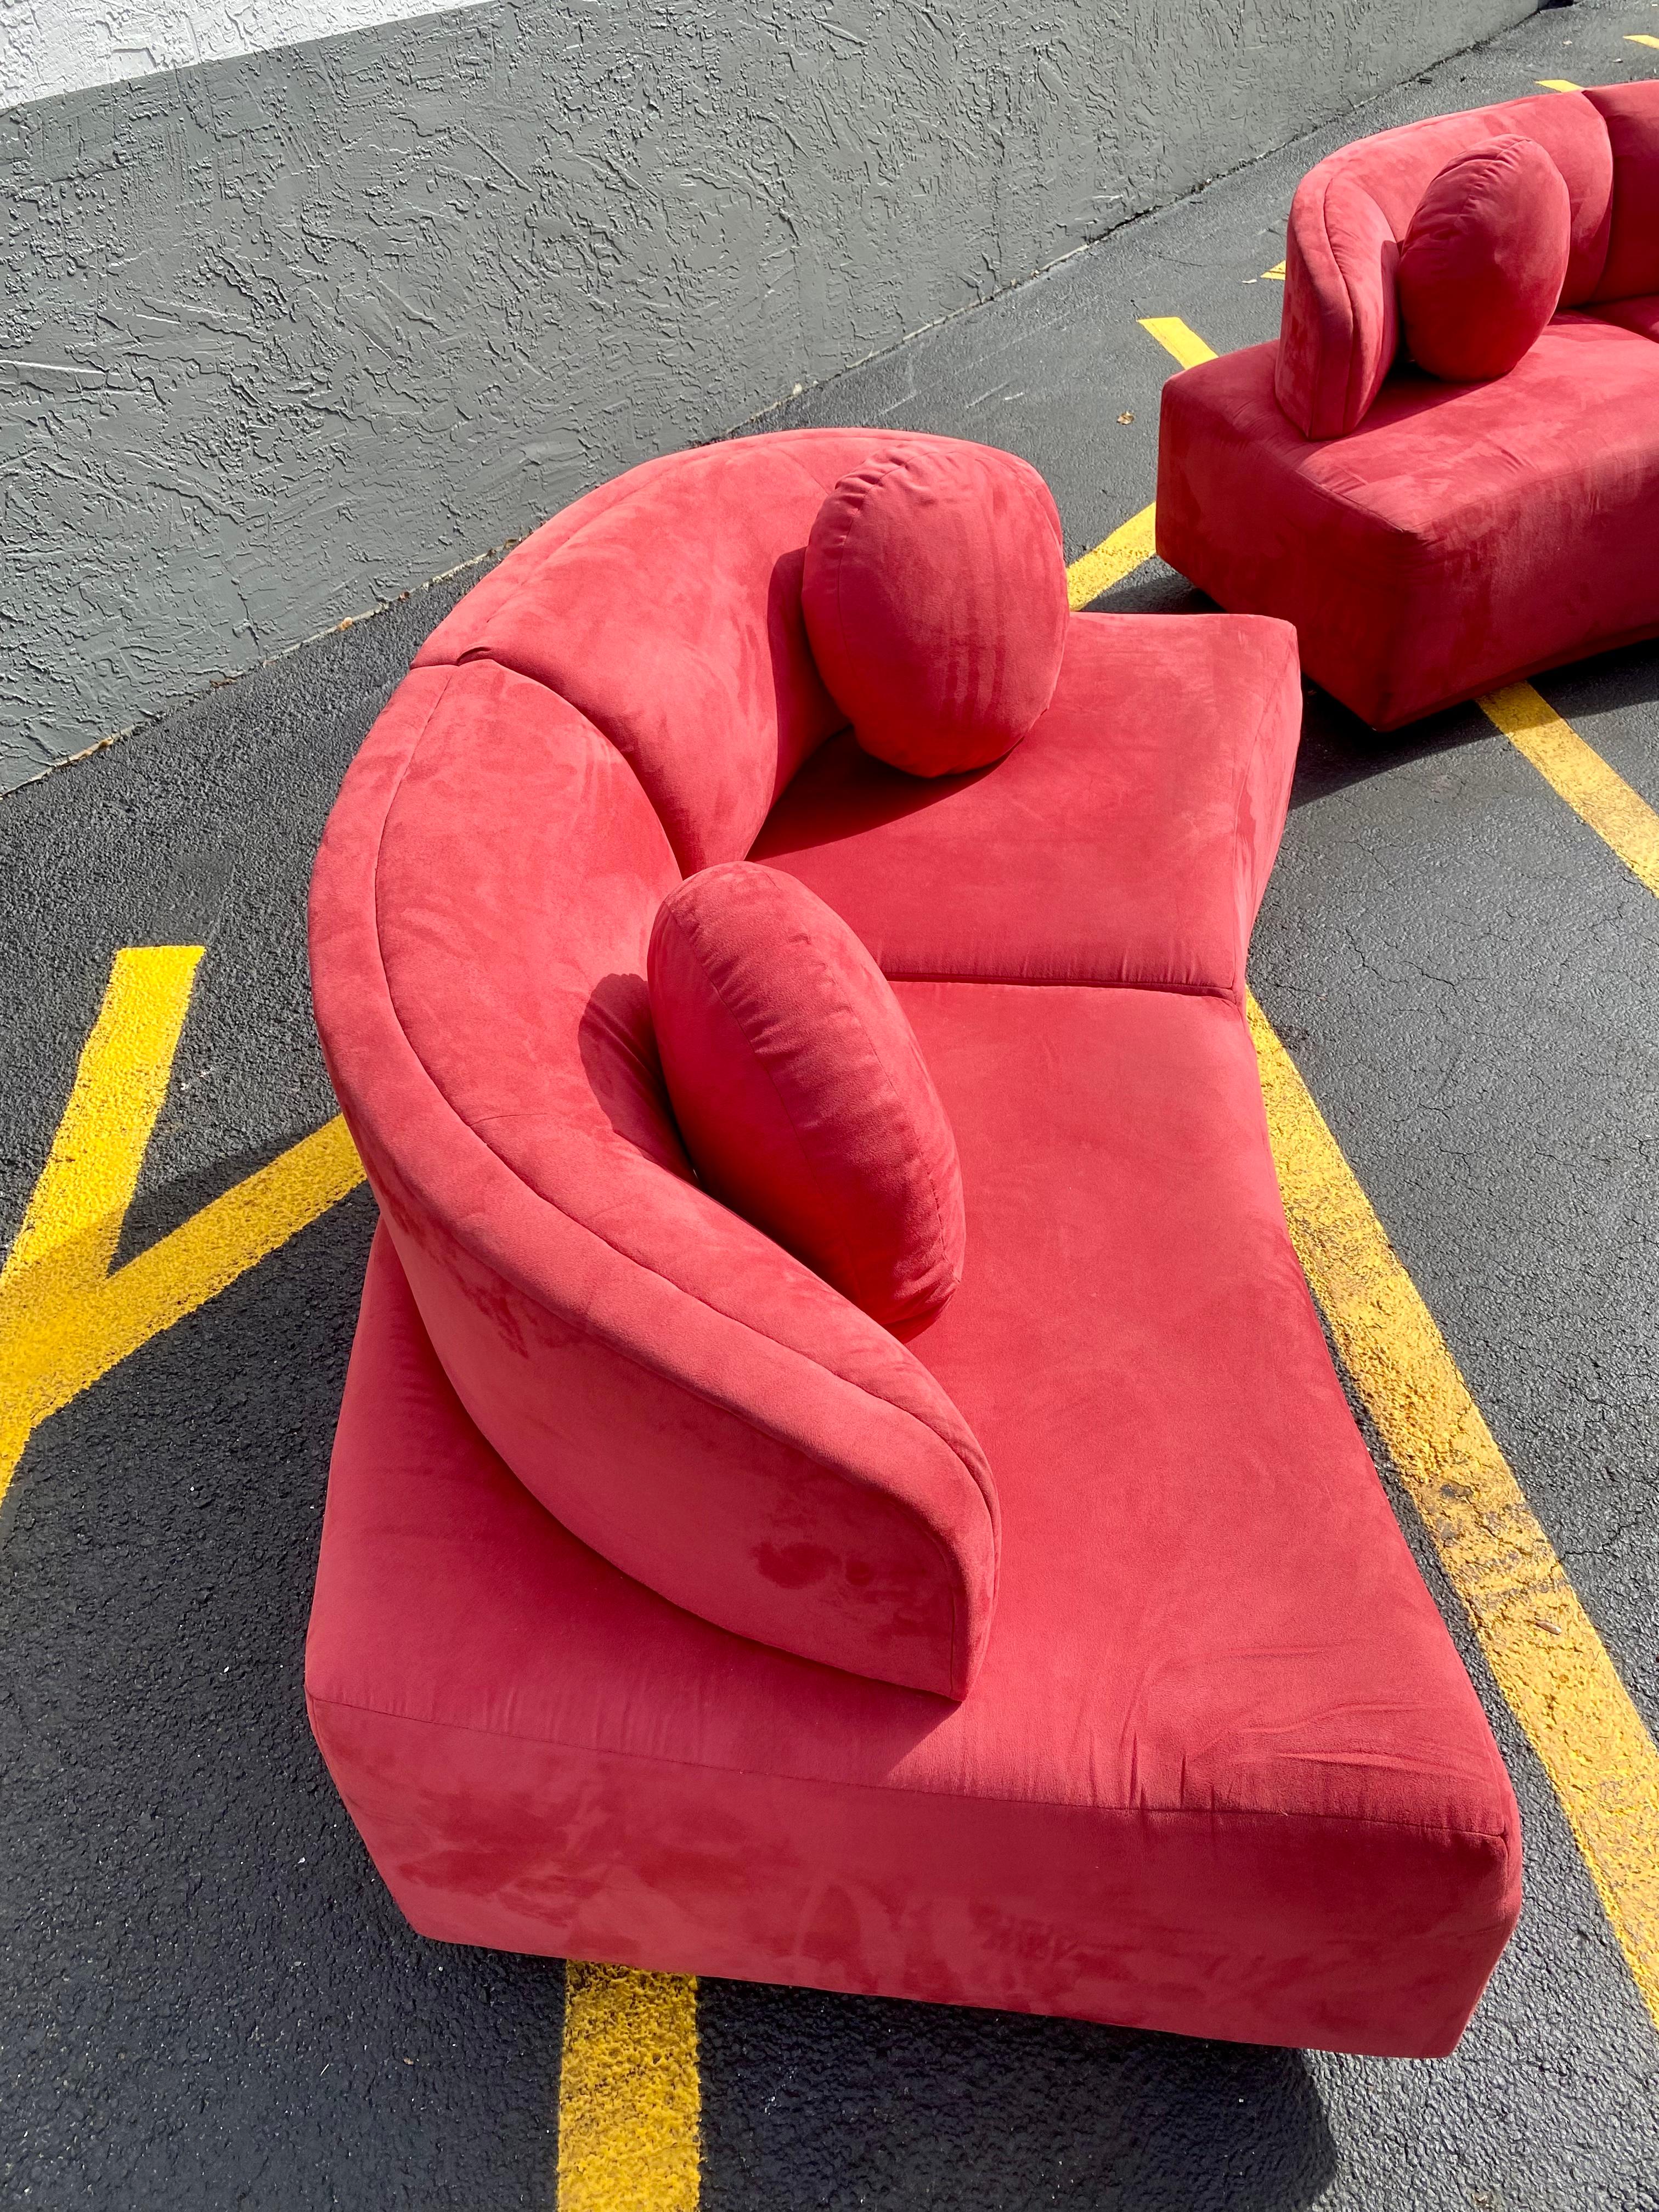 1980s Sculptural Weiman Red Cloud Sofa Loveseat, Set of 2 For Sale 3